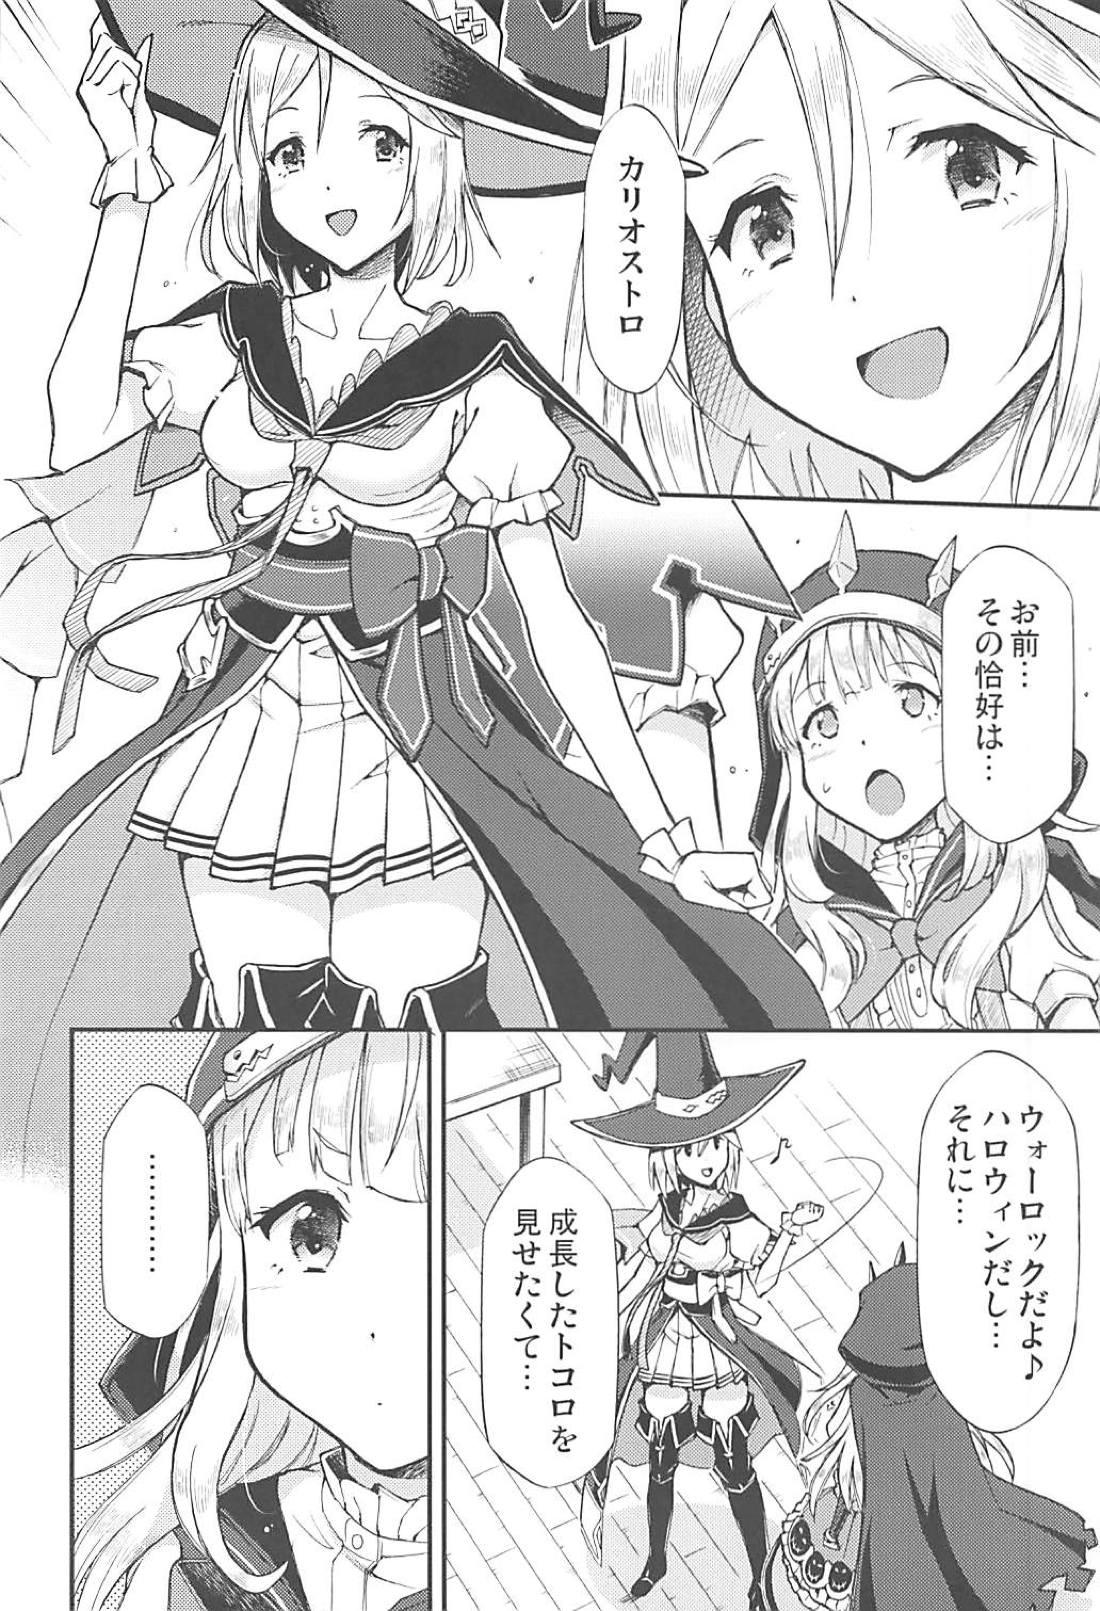 Gostoso TRICK and TREAT - Granblue fantasy Group - Page 3